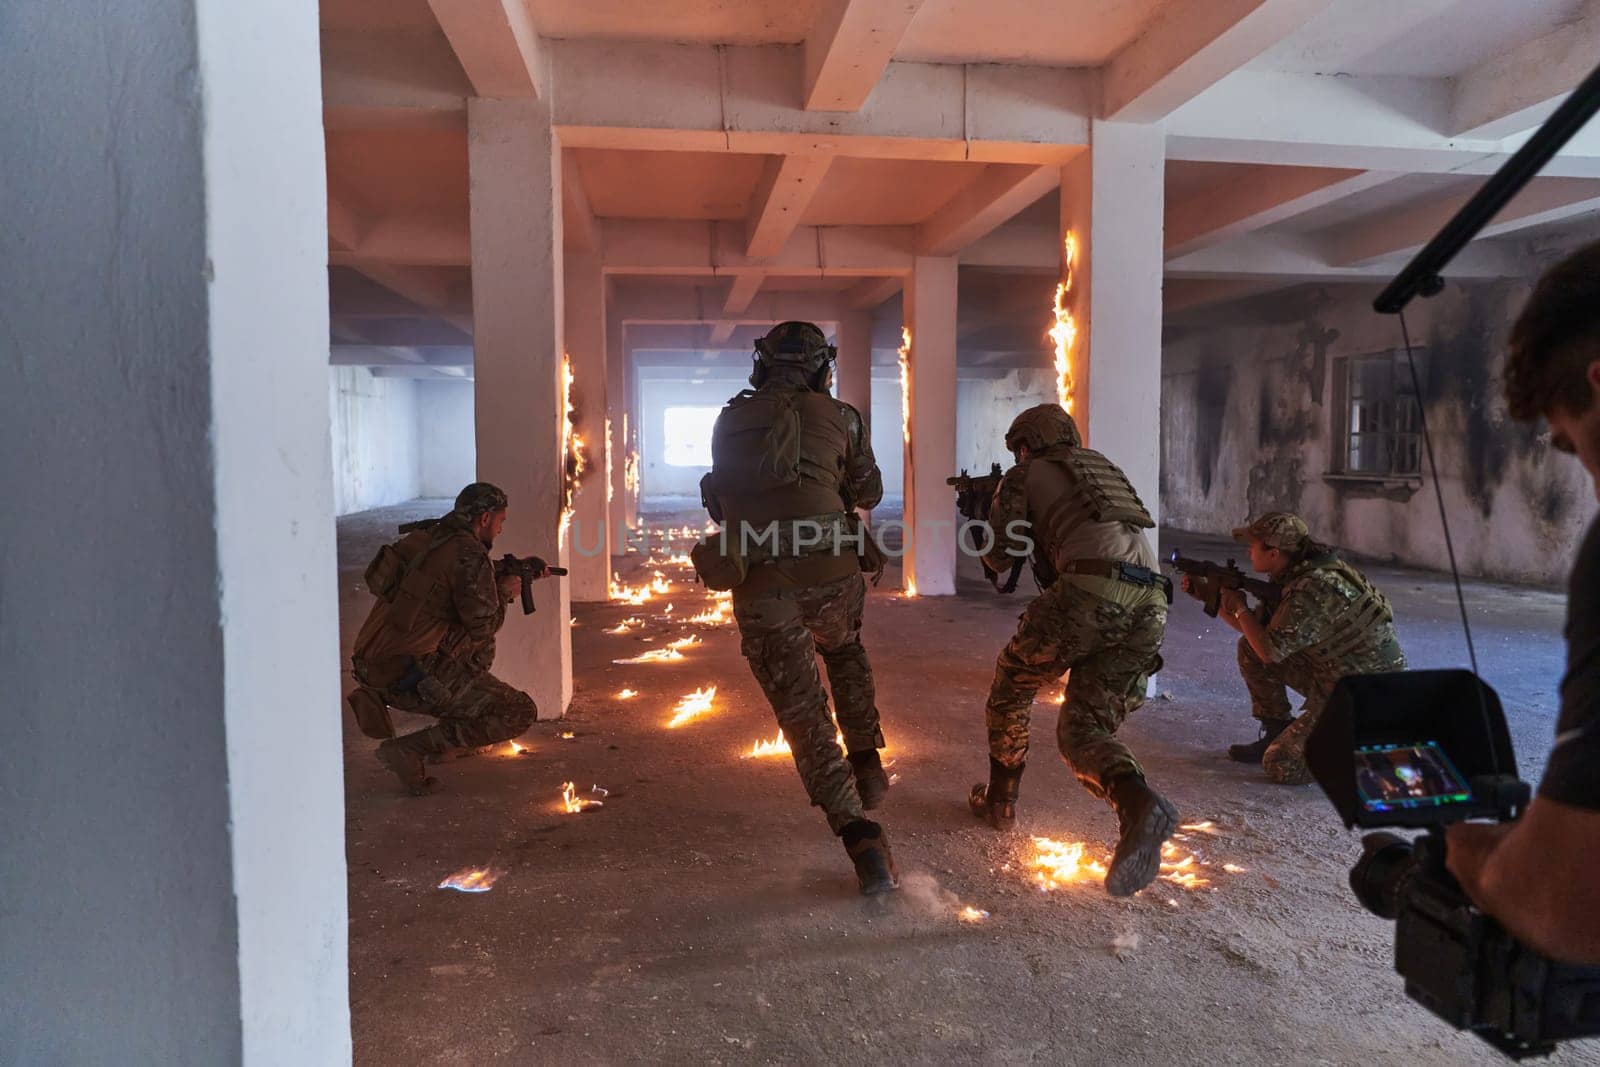 A professional cameraman captures the intense moments as a group of skilled soldiers embarks on a dangerous mission inside an abandoned building, their actions filled with suspense and bravery.